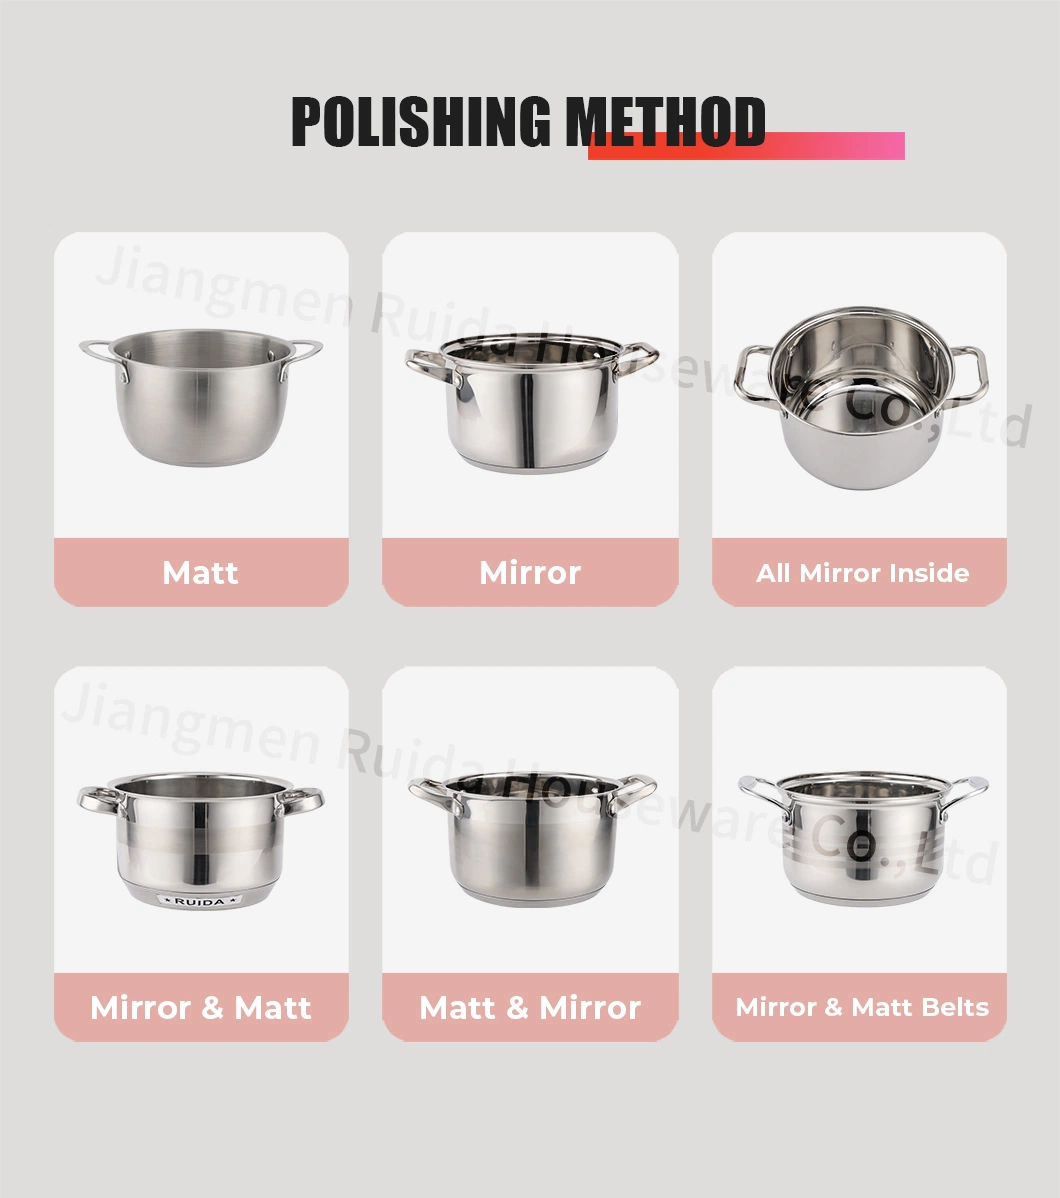 Made in Cookware Kitchenware Utensils Housewares 10PCS Stainless Steel Cookware Set